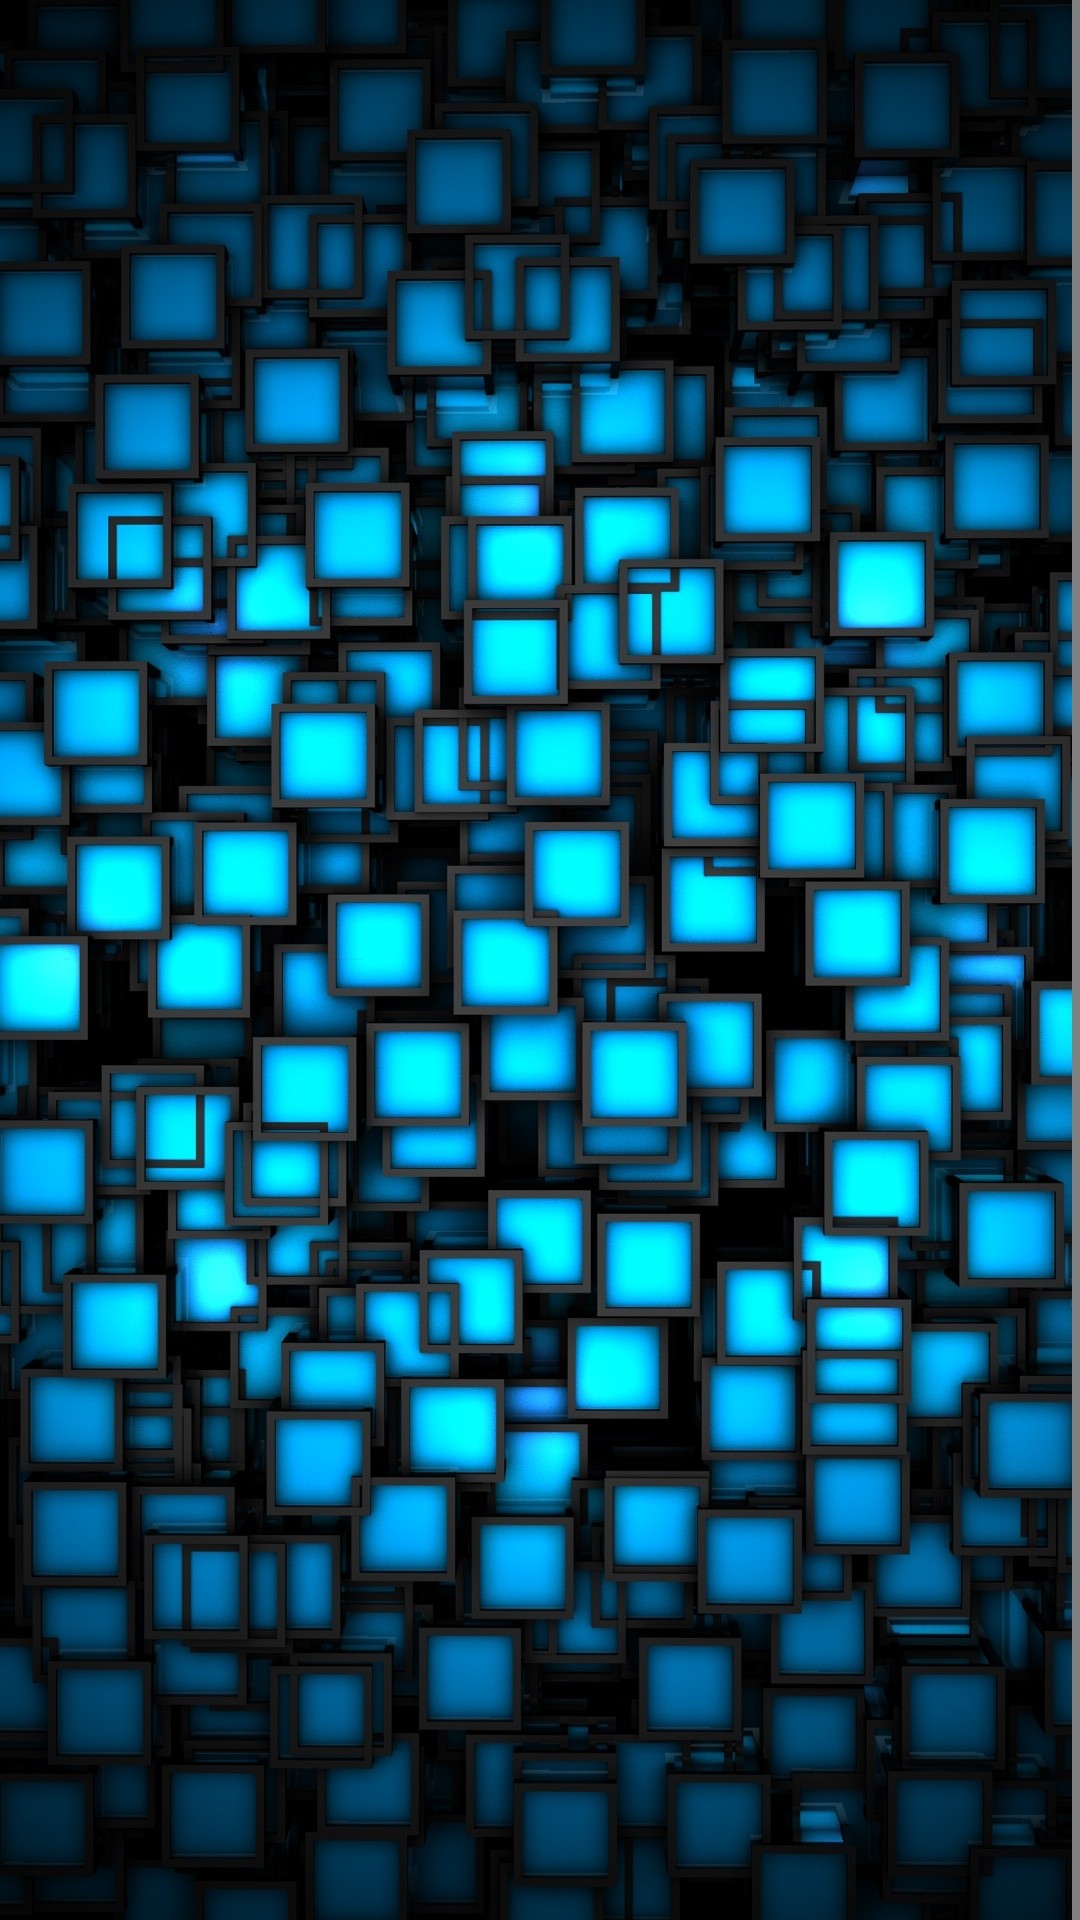 hd wallpapers for mobile,blue,turquoise,cobalt blue,pattern,electric blue